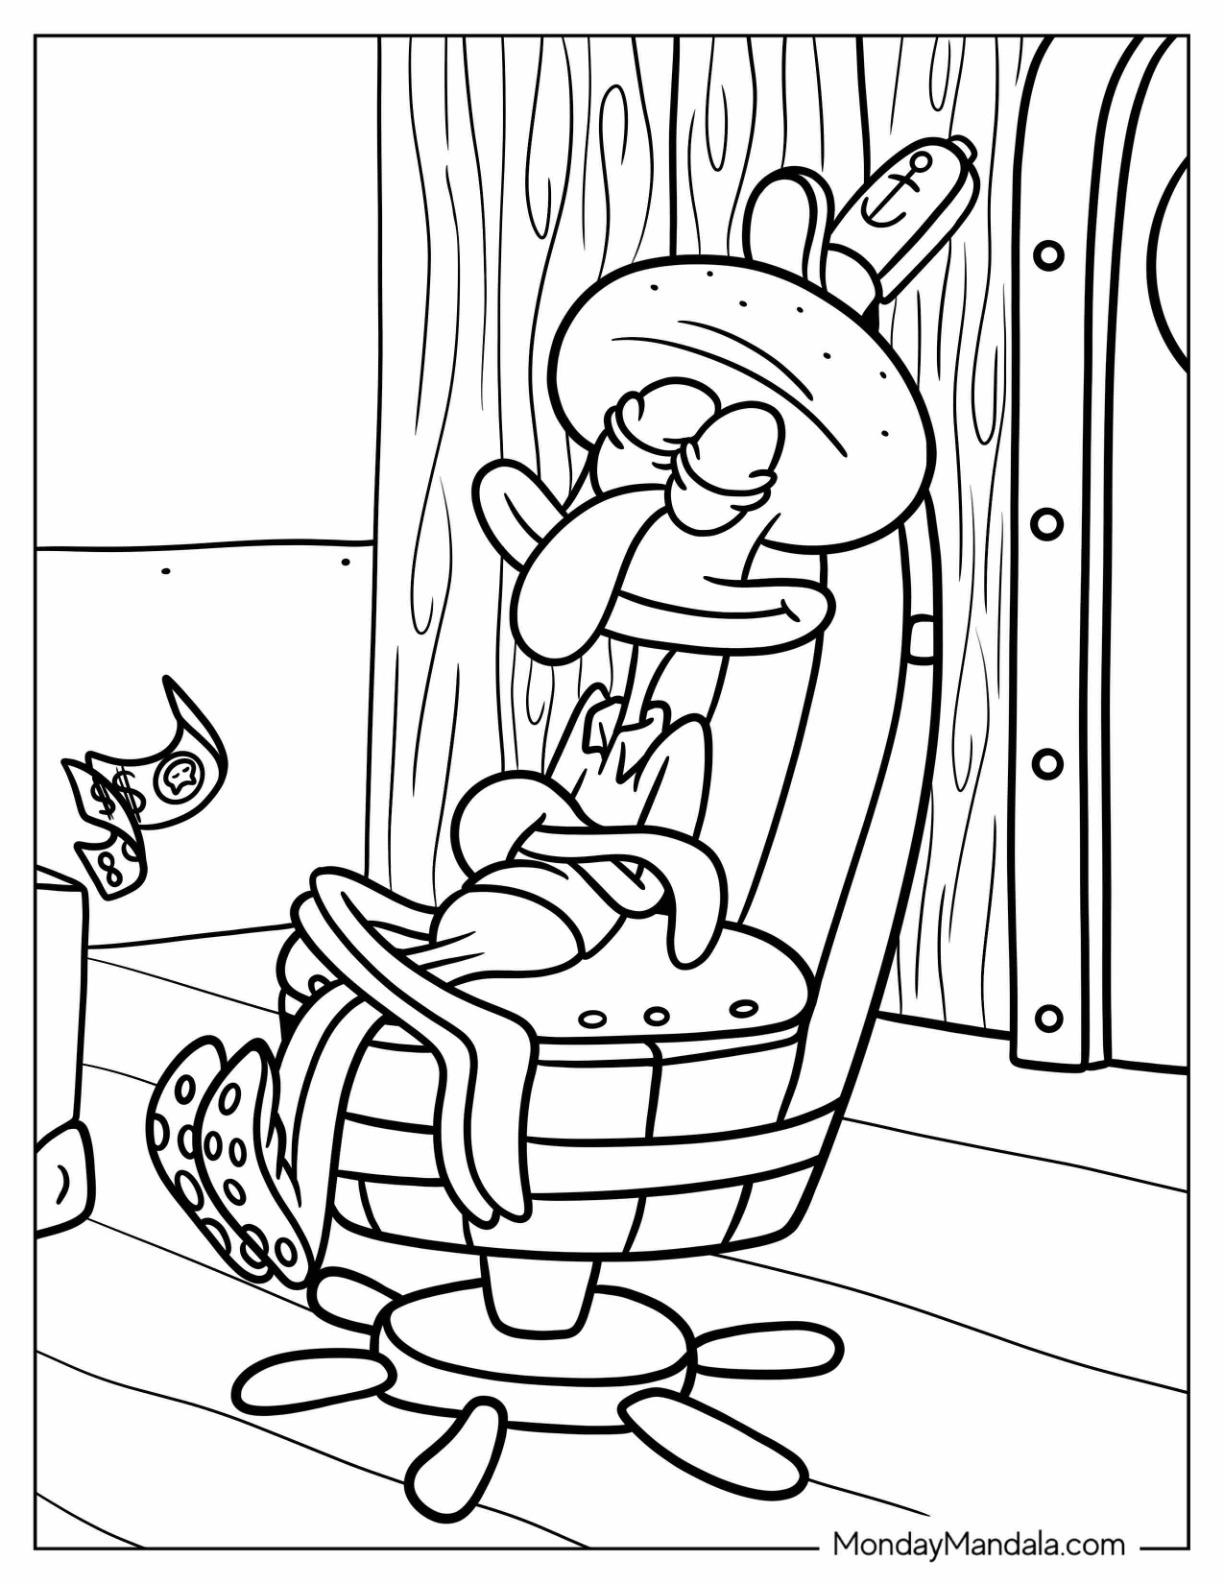 Squidward coloring pages free pdf printables